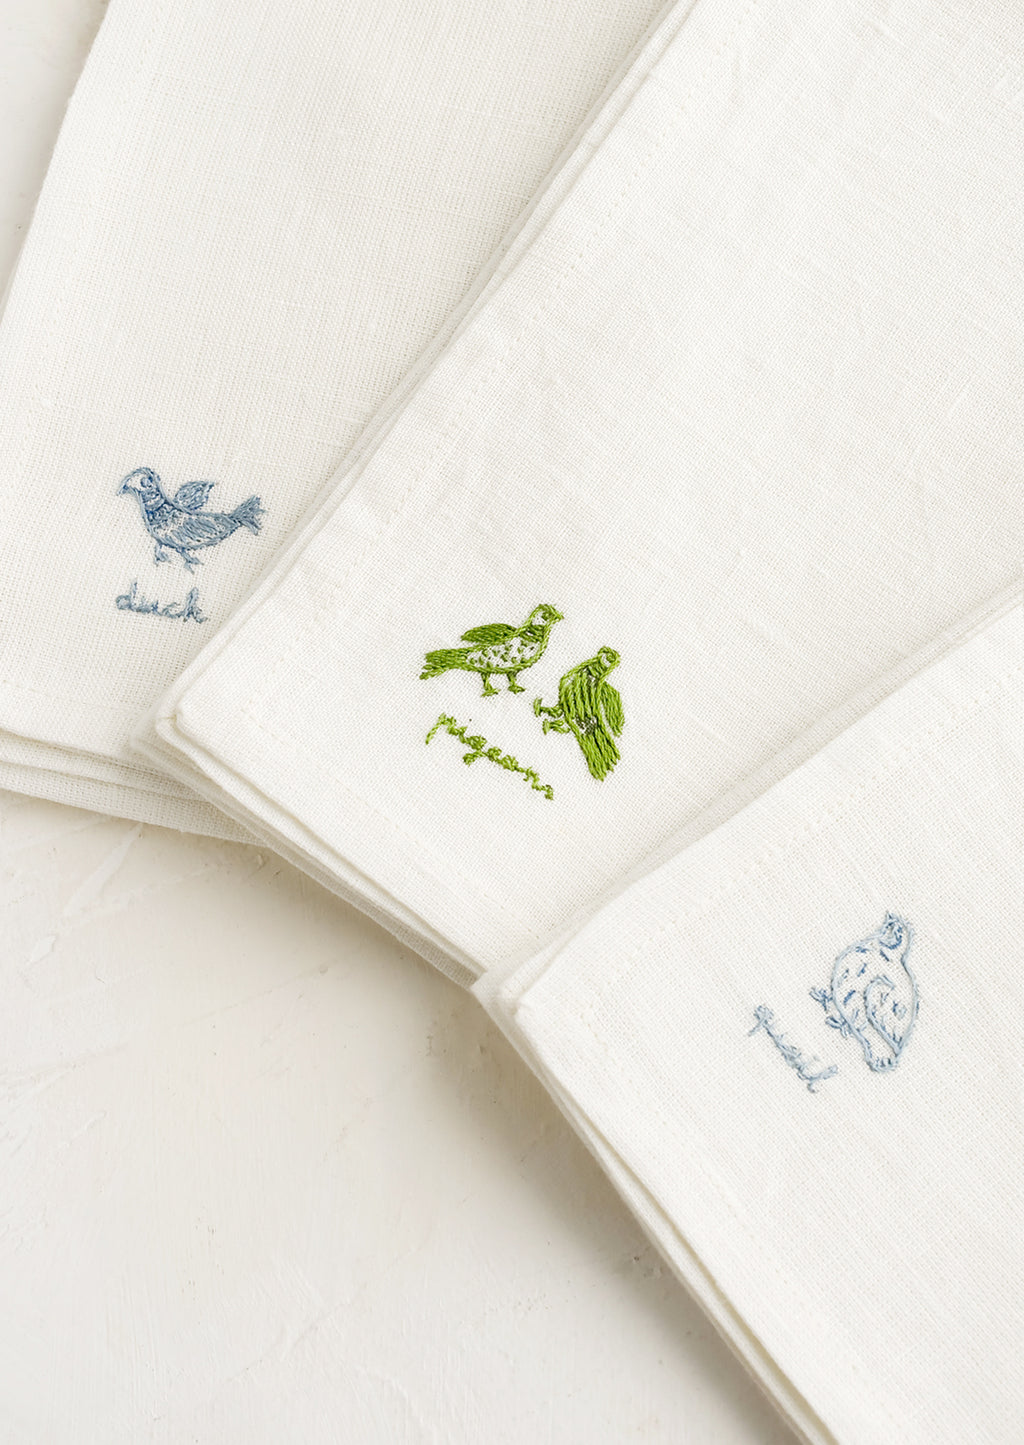 Antique Blue / Quail: White linen napkins with bird embroidery detailing.